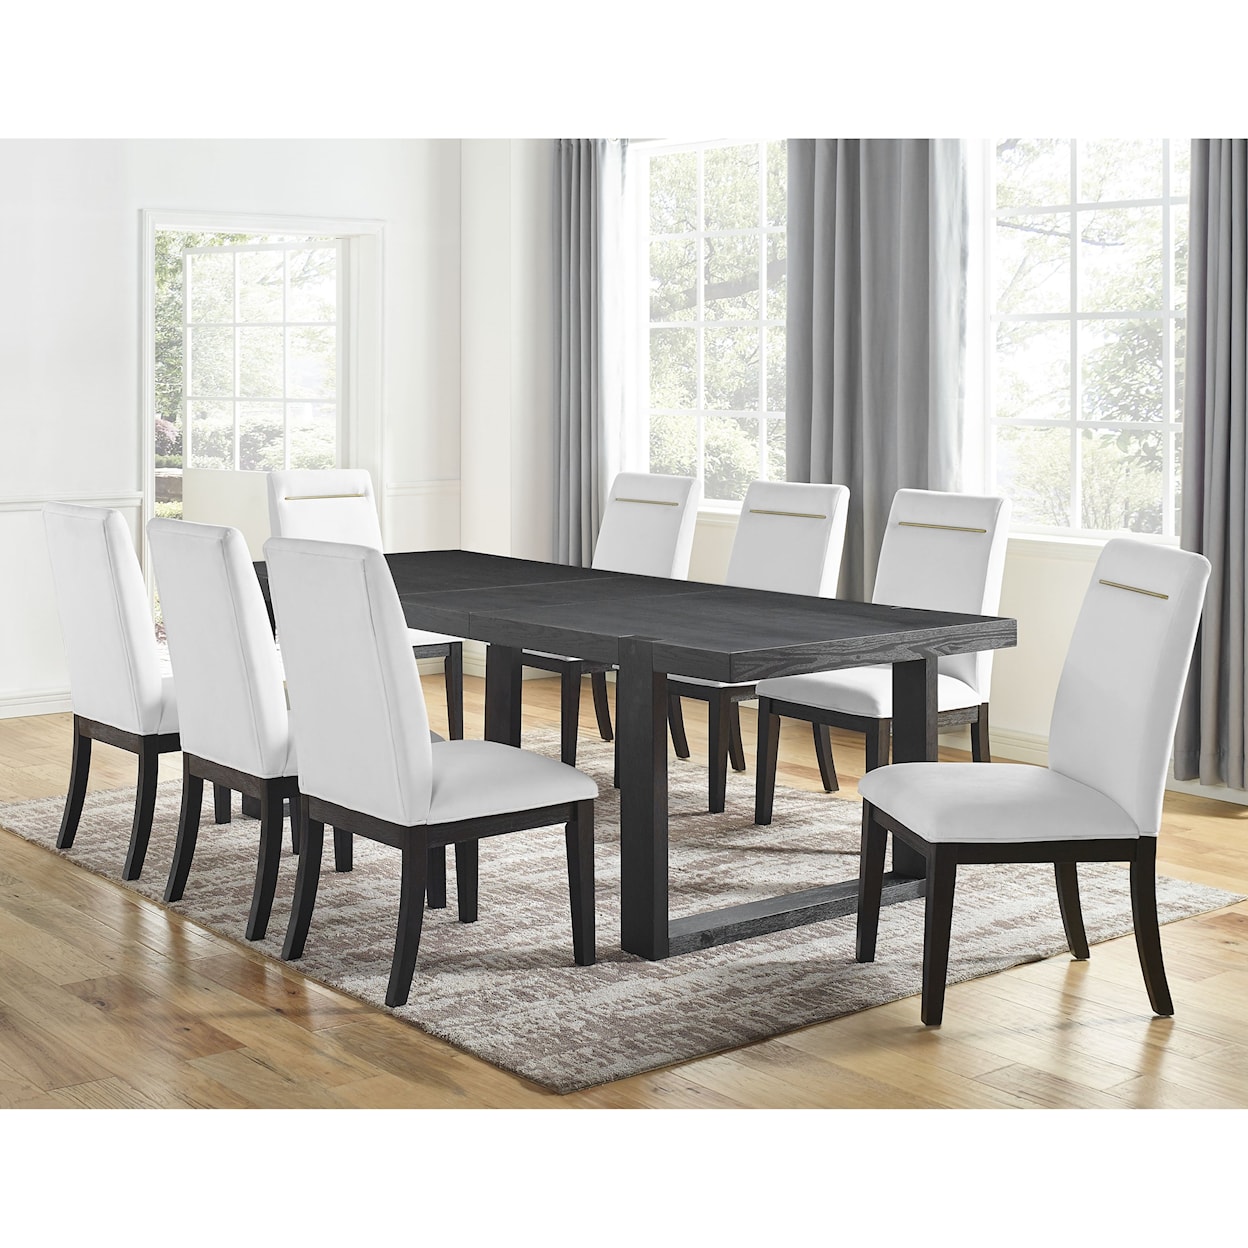 Steve Silver Yves 9-Piece Table and Chair Set